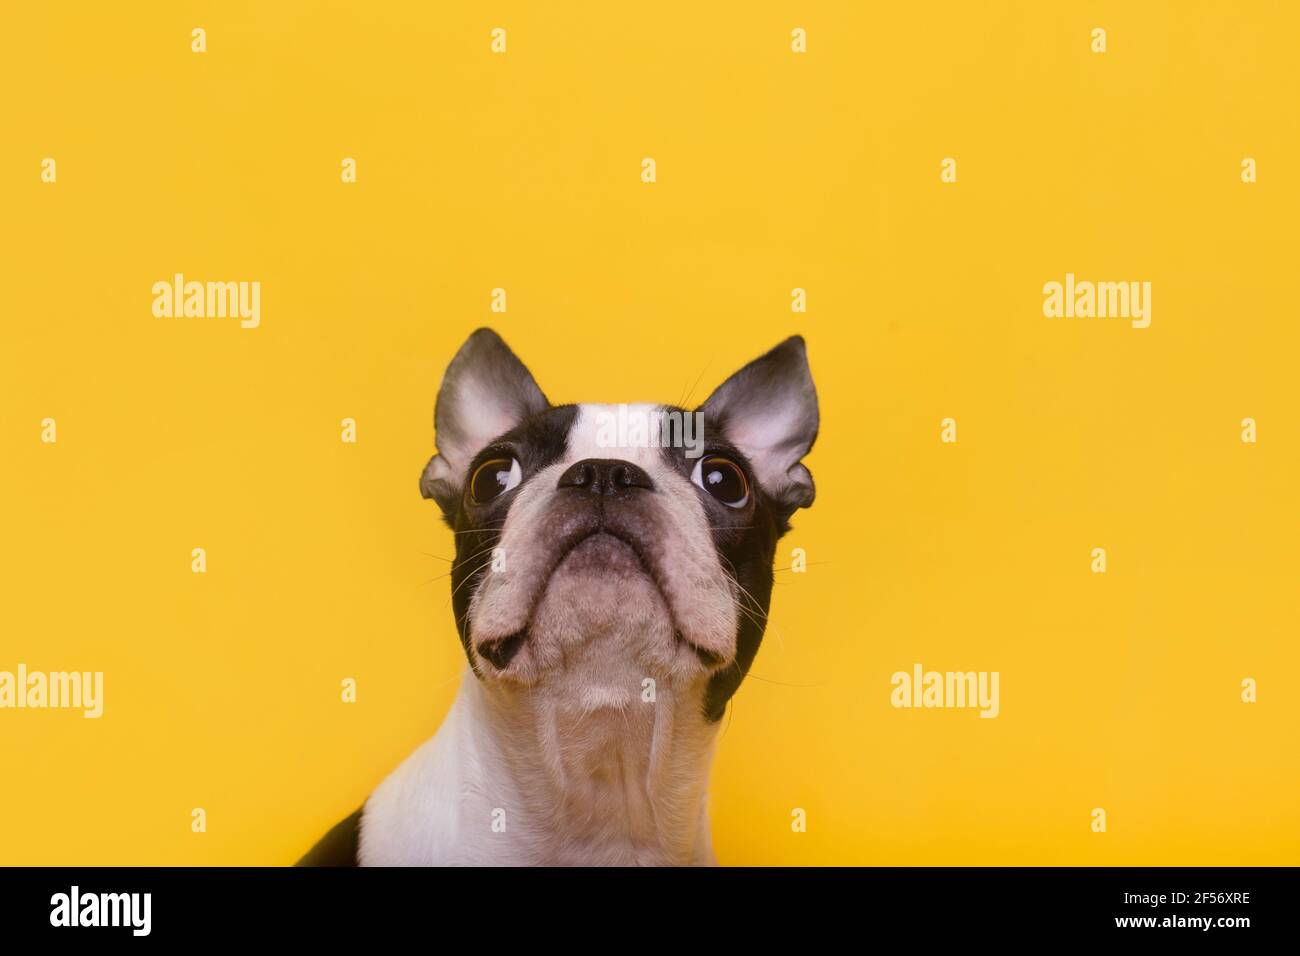 Head of Boston Terrier puppy looking up Stock Photo